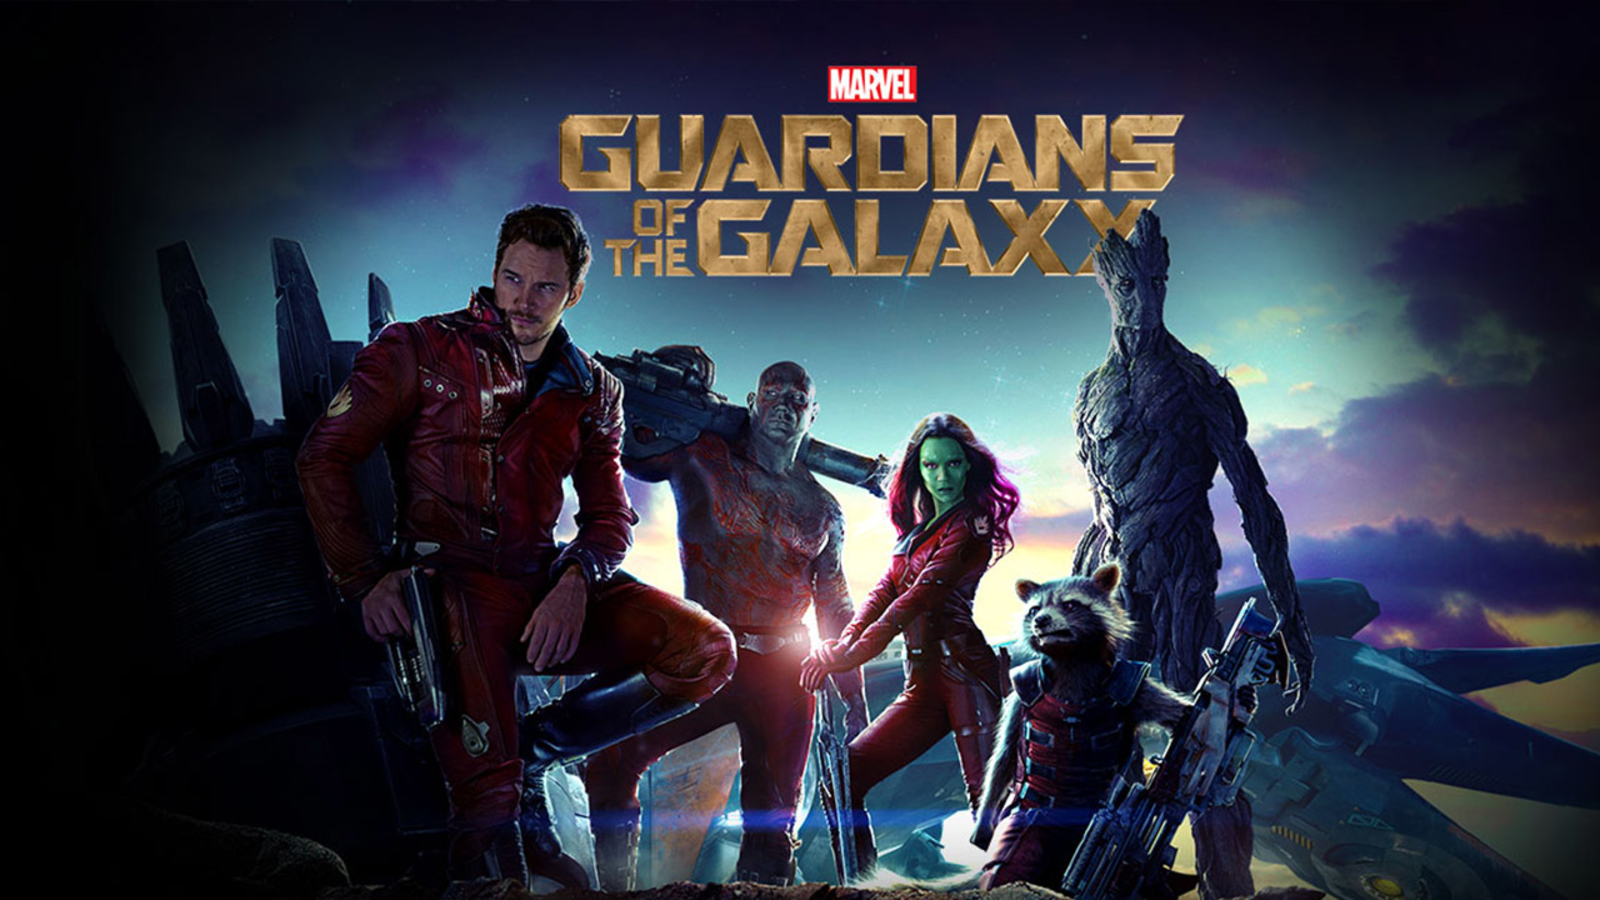 Six reasons why you should go see Guardians of the Galaxy New York